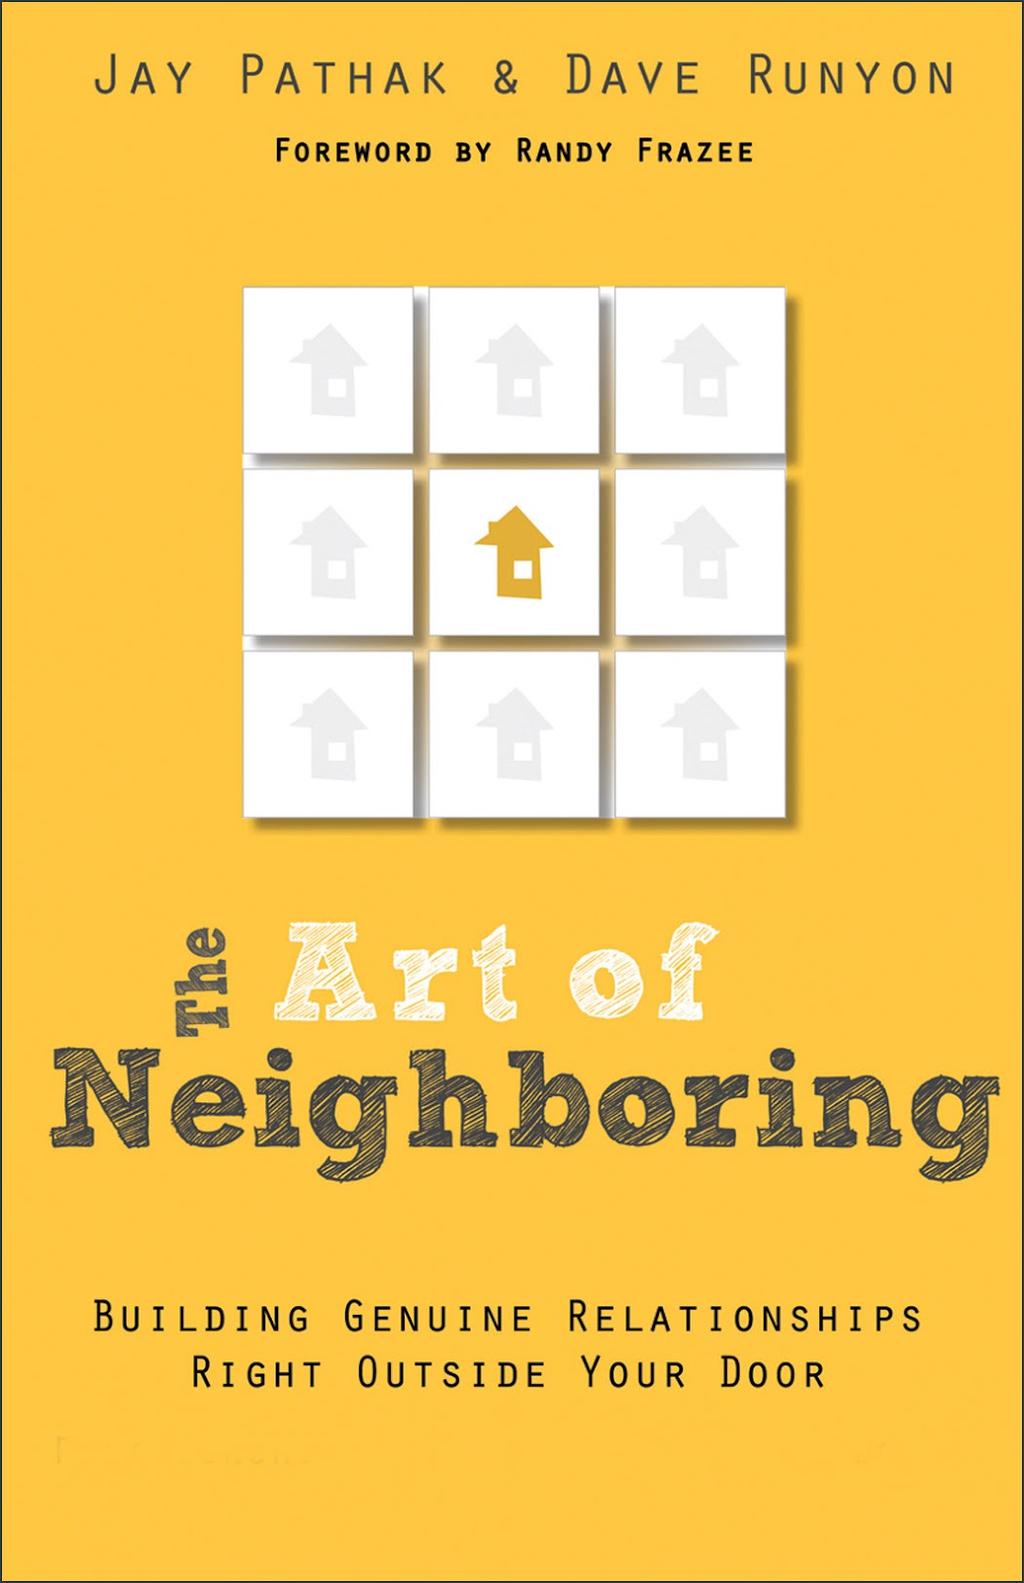 Part three describes mission in neighbourhoods including disciplines of engagement which the author calls "naming", "celebrating", "nurturing" and "inviting".